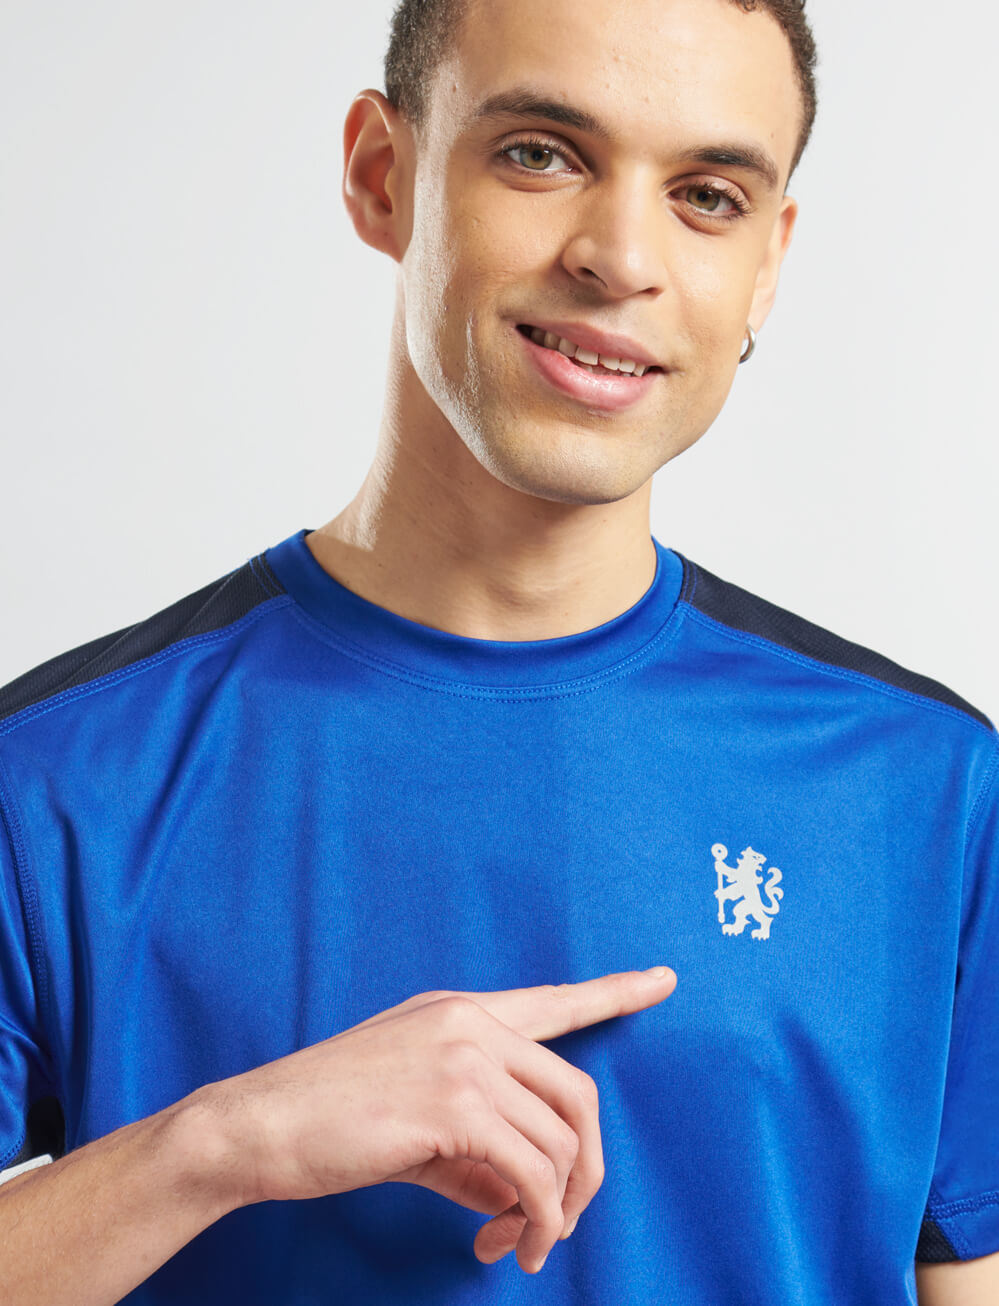 Official Chelsea T-Shirt - Royal Blue - The World Football Store